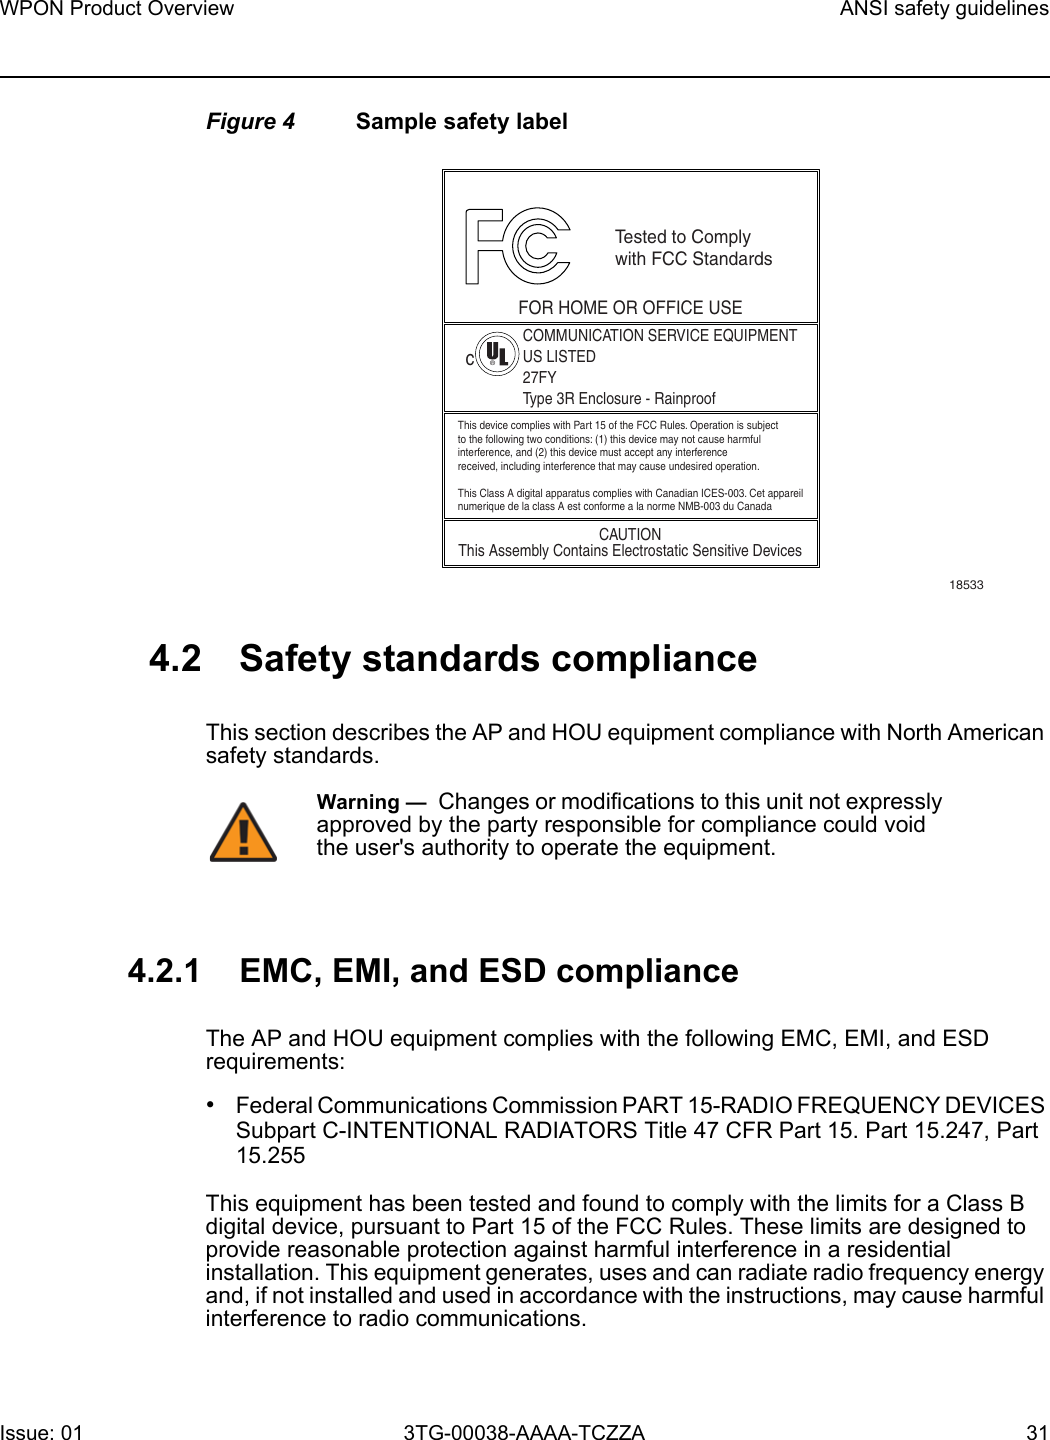 WPON Product Overview ANSI safety guidelinesIssue: 01 3TG-00038-AAAA-TCZZA 31 Figure 4 Sample safety label4.2 Safety standards complianceThis section describes the AP and HOU equipment compliance with North American safety standards.4.2.1 EMC, EMI, and ESD complianceThe AP and HOU equipment complies with the following EMC, EMI, and ESD requirements: •Federal Communications Commission PART 15-RADIO FREQUENCY DEVICES Subpart C-INTENTIONAL RADIATORS Title 47 CFR Part 15. Part 15.247, Part 15.255This equipment has been tested and found to comply with the limits for a Class B digital device, pursuant to Part 15 of the FCC Rules. These limits are designed to provide reasonable protection against harmful interference in a residential installation. This equipment generates, uses and can radiate radio frequency energy and, if not installed and used in accordance with the instructions, may cause harmful interference to radio communications.18533This device complies with Part 15 of the FCC Rules. Operation is subjectto the following two conditions: (1) this device may not cause harmfulinterference, and (2) this device must accept any interferencereceived, including interference that may cause undesired operation.This Class A digital apparatus complies with Canadian ICES-003. Cet appareilnumerique de la class A est conforme a la norme NMB-003 du CanadaTested to Complywith FCC StandardsFOR HOME OR OFFICE USECOMMUNICATION SERVICE EQUIPMENTUS LISTED27FYType 3R Enclosure - RainproofCAUTIONThis Assembly Contains Electrostatic Sensitive Devicesc®Warning —  Changes or modifications to this unit not expressly approved by the party responsible for compliance could void the user&apos;s authority to operate the equipment.